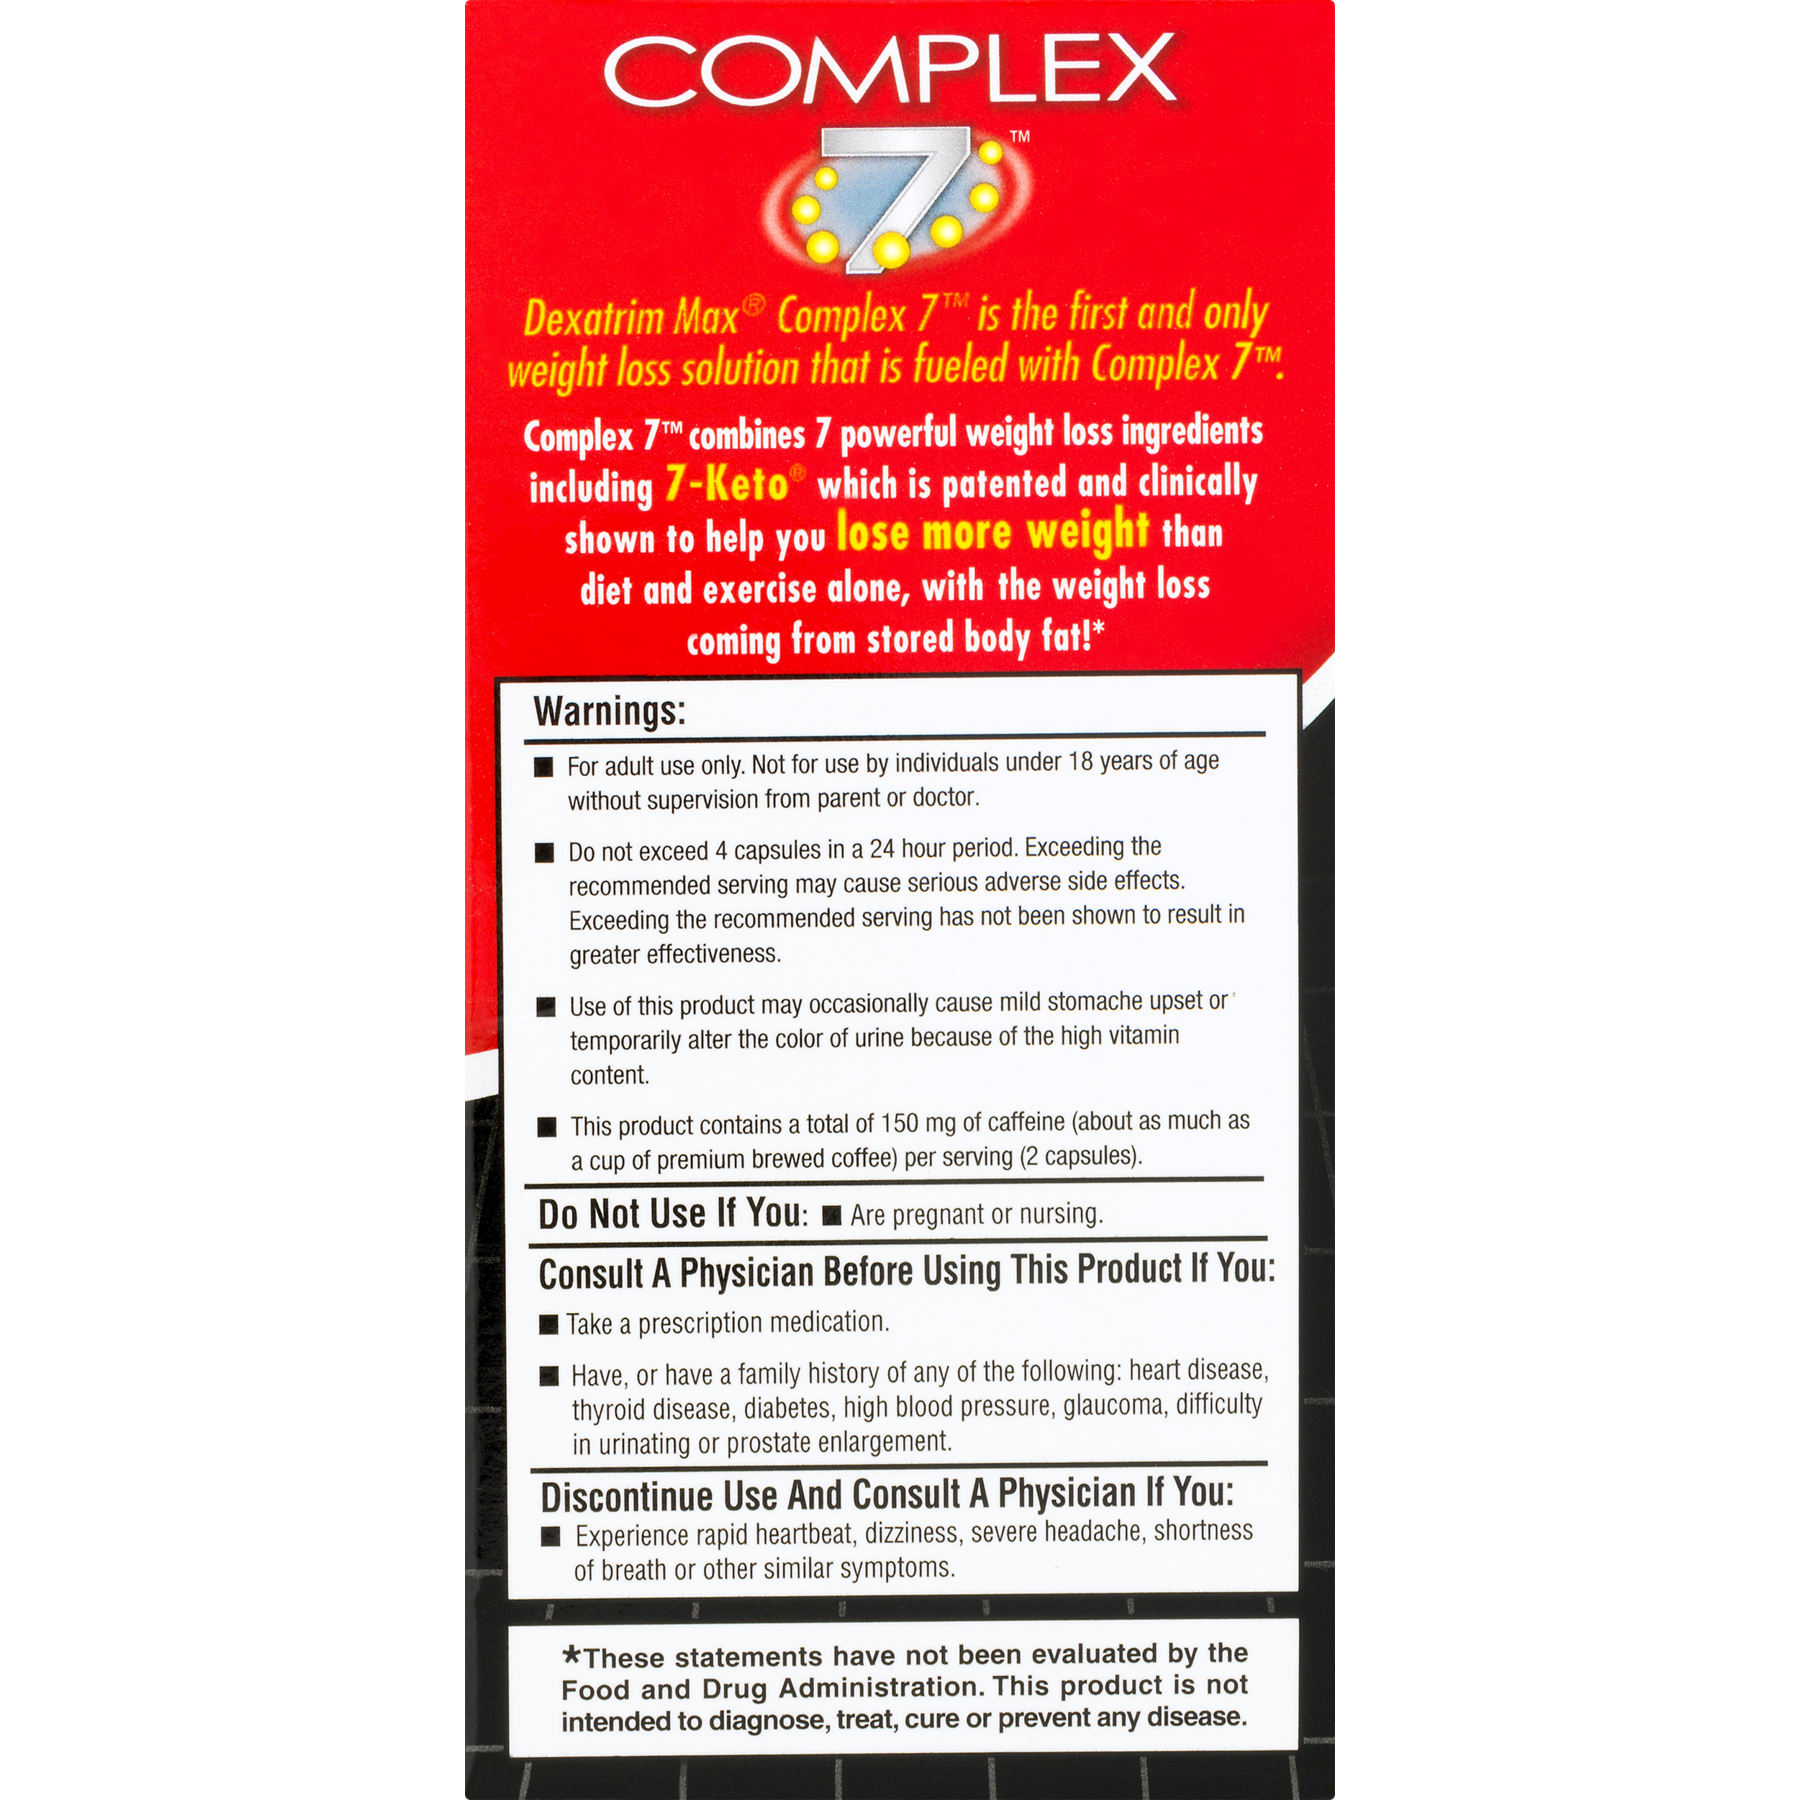 Dexatrim Max Complex Appetite Suppressant Weight Loss Dietary Supplement, Ctules, 60 Ct - image 4 of 7